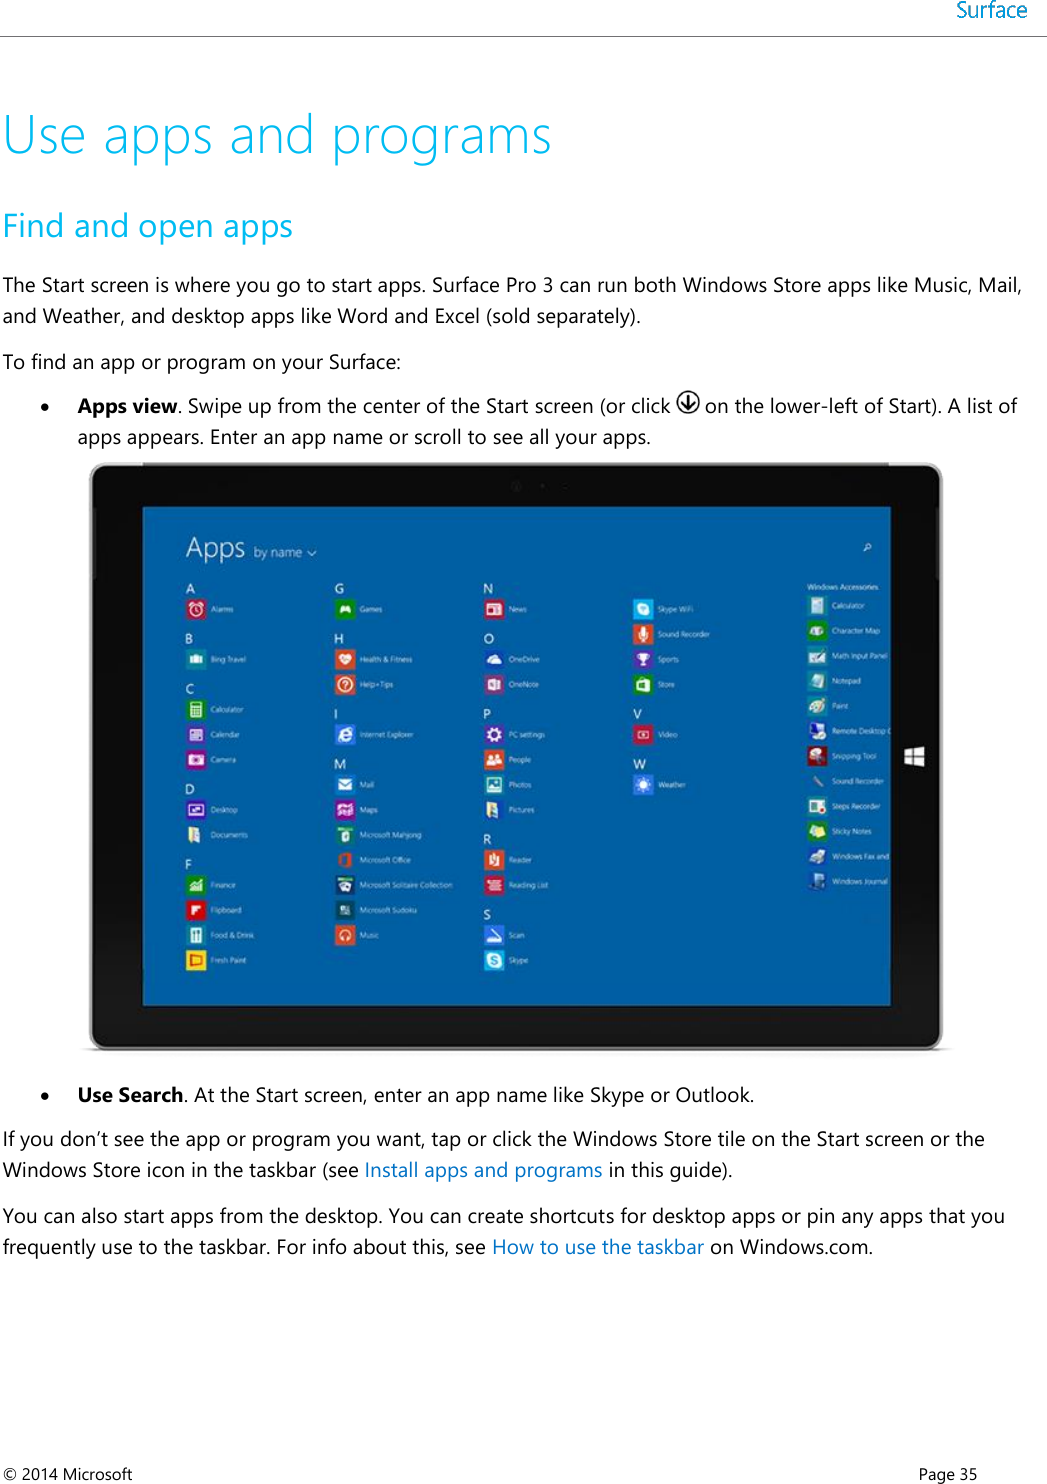  © 2014 Microsoft      Page 35  Use apps and programs Find and open apps The Start screen is where you go to start apps. Surface Pro 3 can run both Windows Store apps like Music, Mail, and Weather, and desktop apps like Word and Excel (sold separately). To find an app or program on your Surface:  Apps view. Swipe up from the center of the Start screen (or click   on the lower-left of Start). A list of apps appears. Enter an app name or scroll to see all your apps.   Use Search. At the Start screen, enter an app name like Skype or Outlook. If you don’t see the app or program you want, tap or click the Windows Store tile on the Start screen or the Windows Store icon in the taskbar (see Install apps and programs in this guide). You can also start apps from the desktop. You can create shortcuts for desktop apps or pin any apps that you frequently use to the taskbar. For info about this, see How to use the taskbar on Windows.com. 